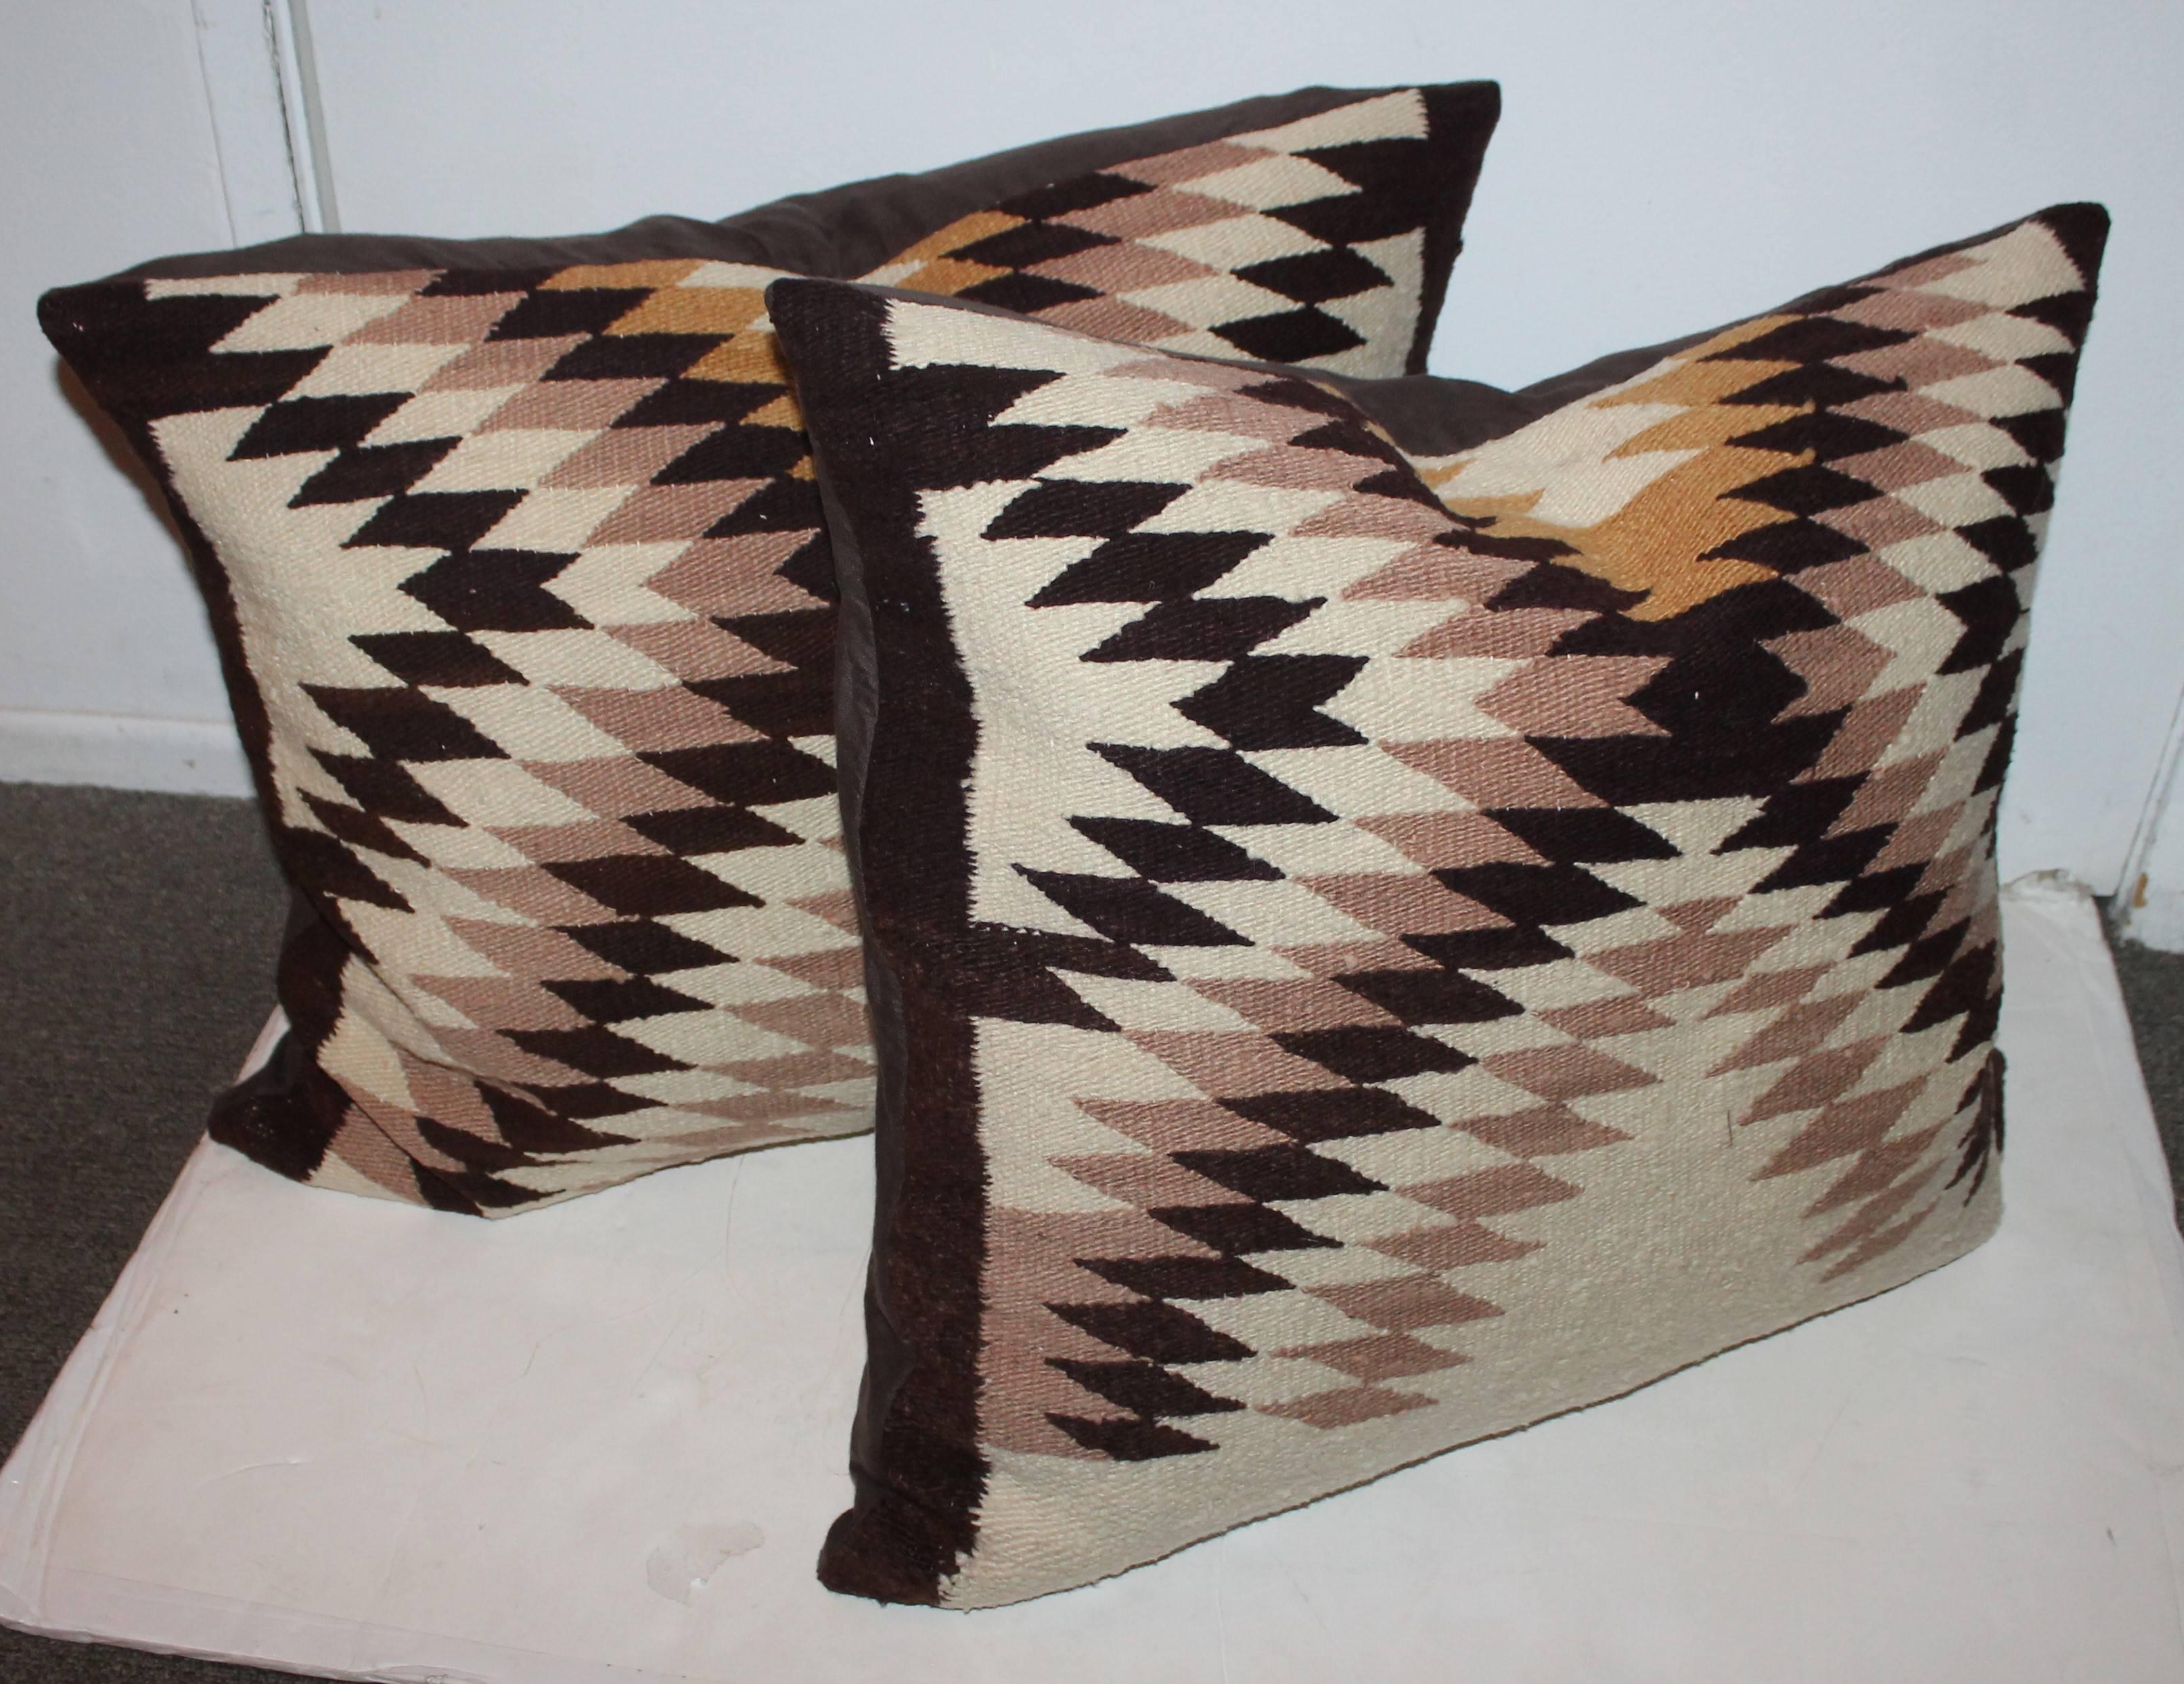 These large Navajo weaving bolster pillows are in a eye dazzler pattern and have a black cotton linen backing. Sold as a matching pair.